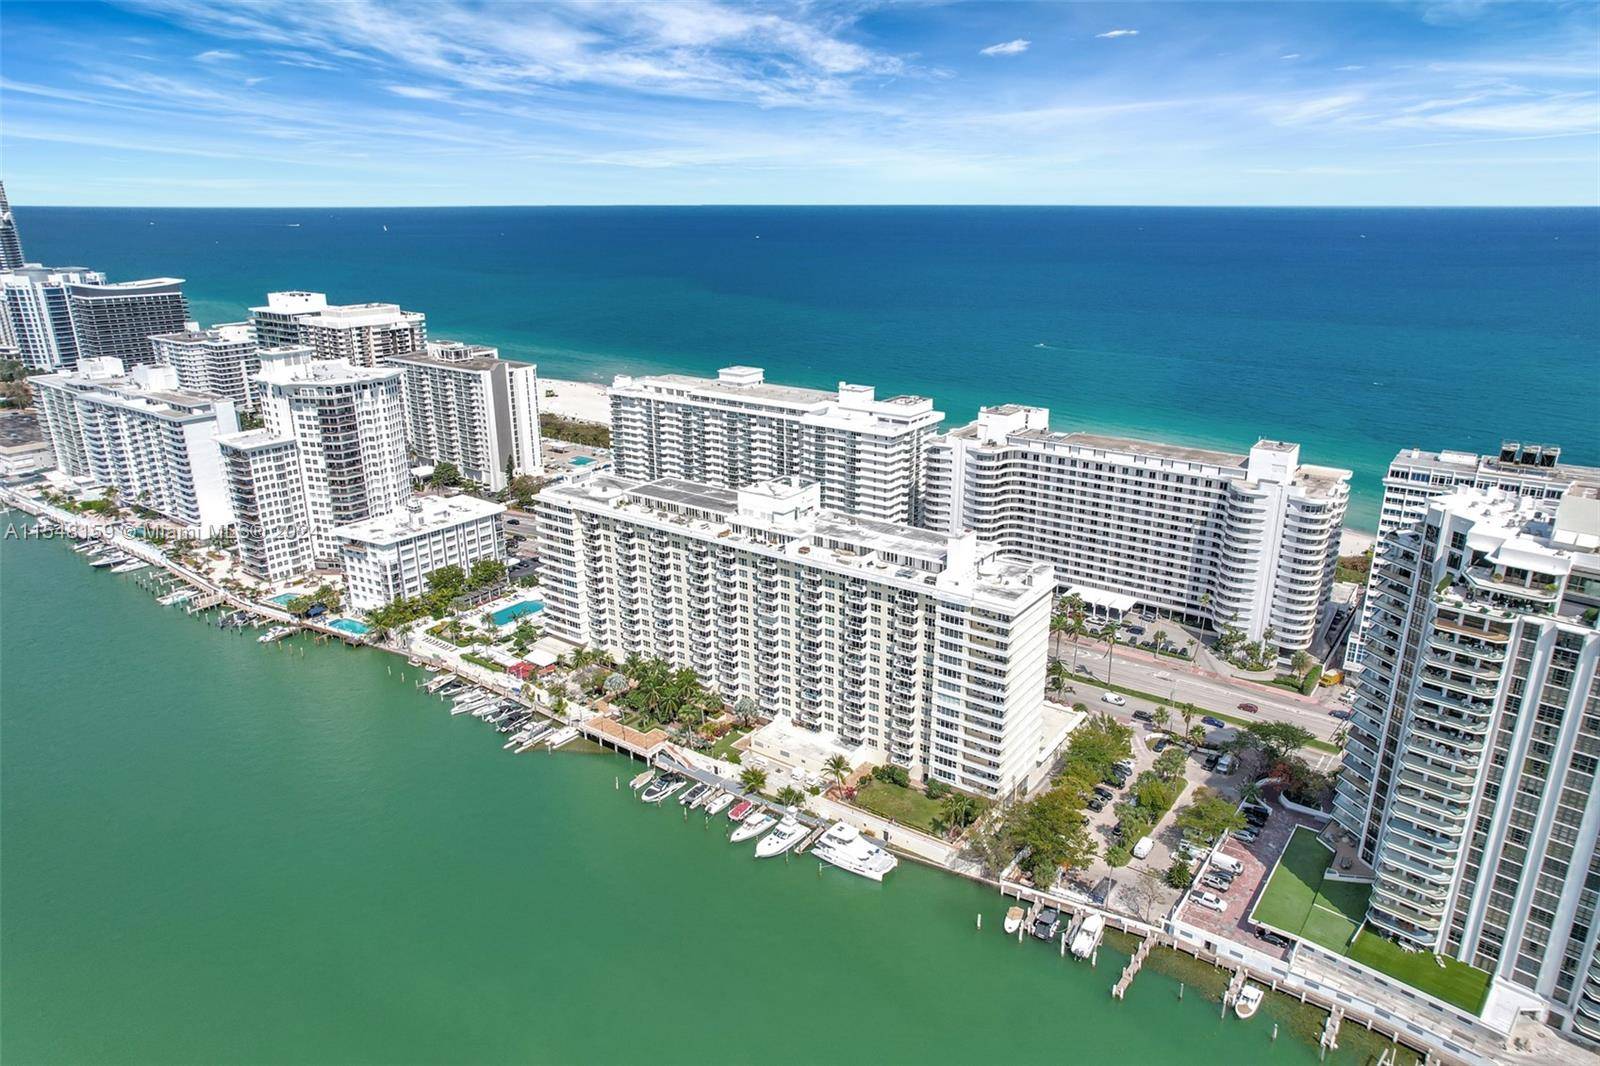 Immerse yourself in stunning water and sunsets views every day from almost any room in this 1 Bed 1 Bath Miami Beach condo.